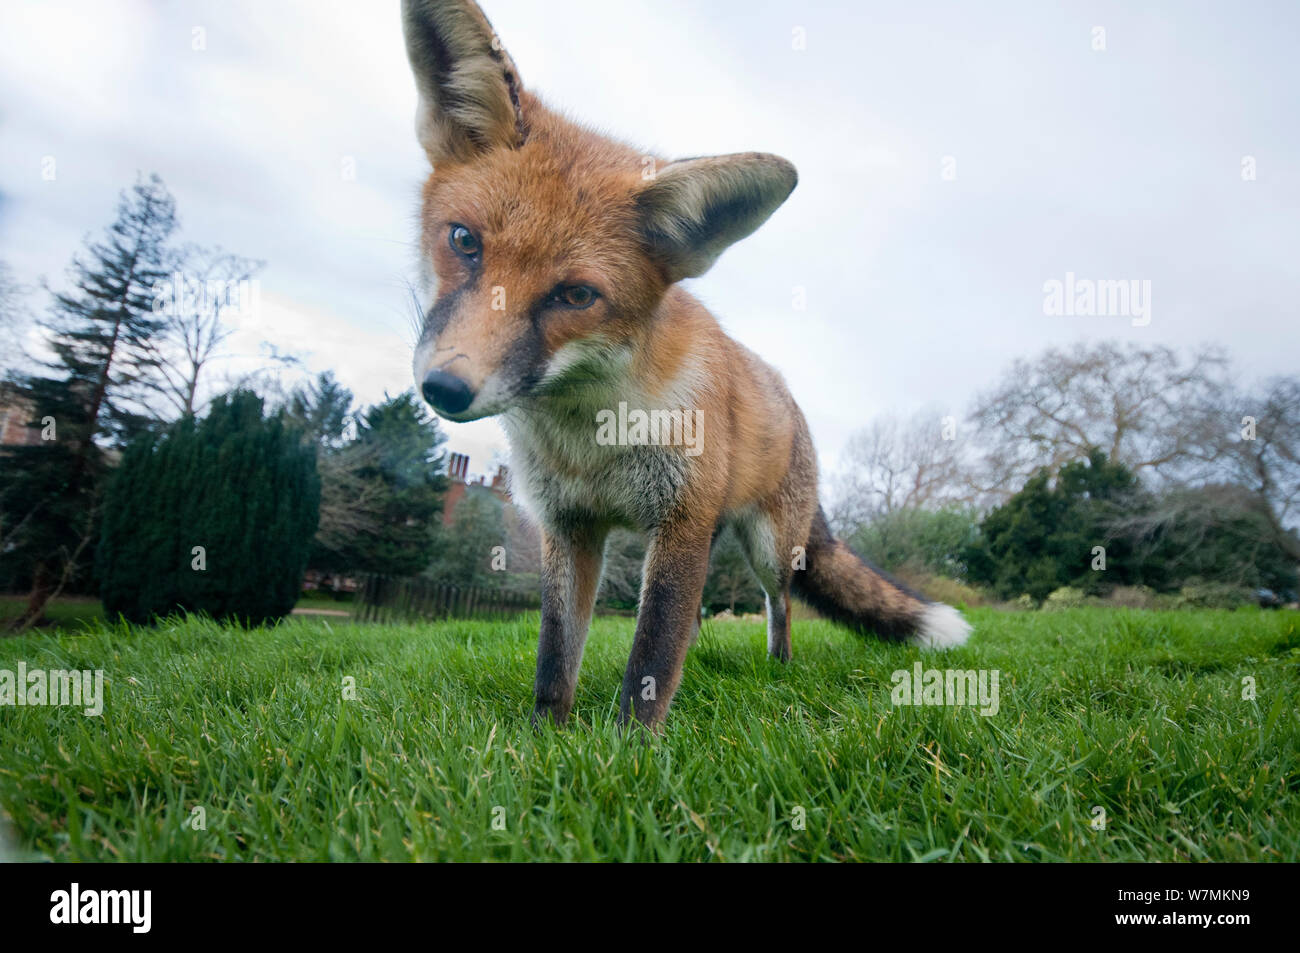 Young Red fox (Vulpes vulpes) investigating a remote controlled camera in urban park, Bristol, UK, February. Did you know?  Red foxes have distinctive body language, and inquisitive foxes will flick their ears while sniffing. Stock Photo